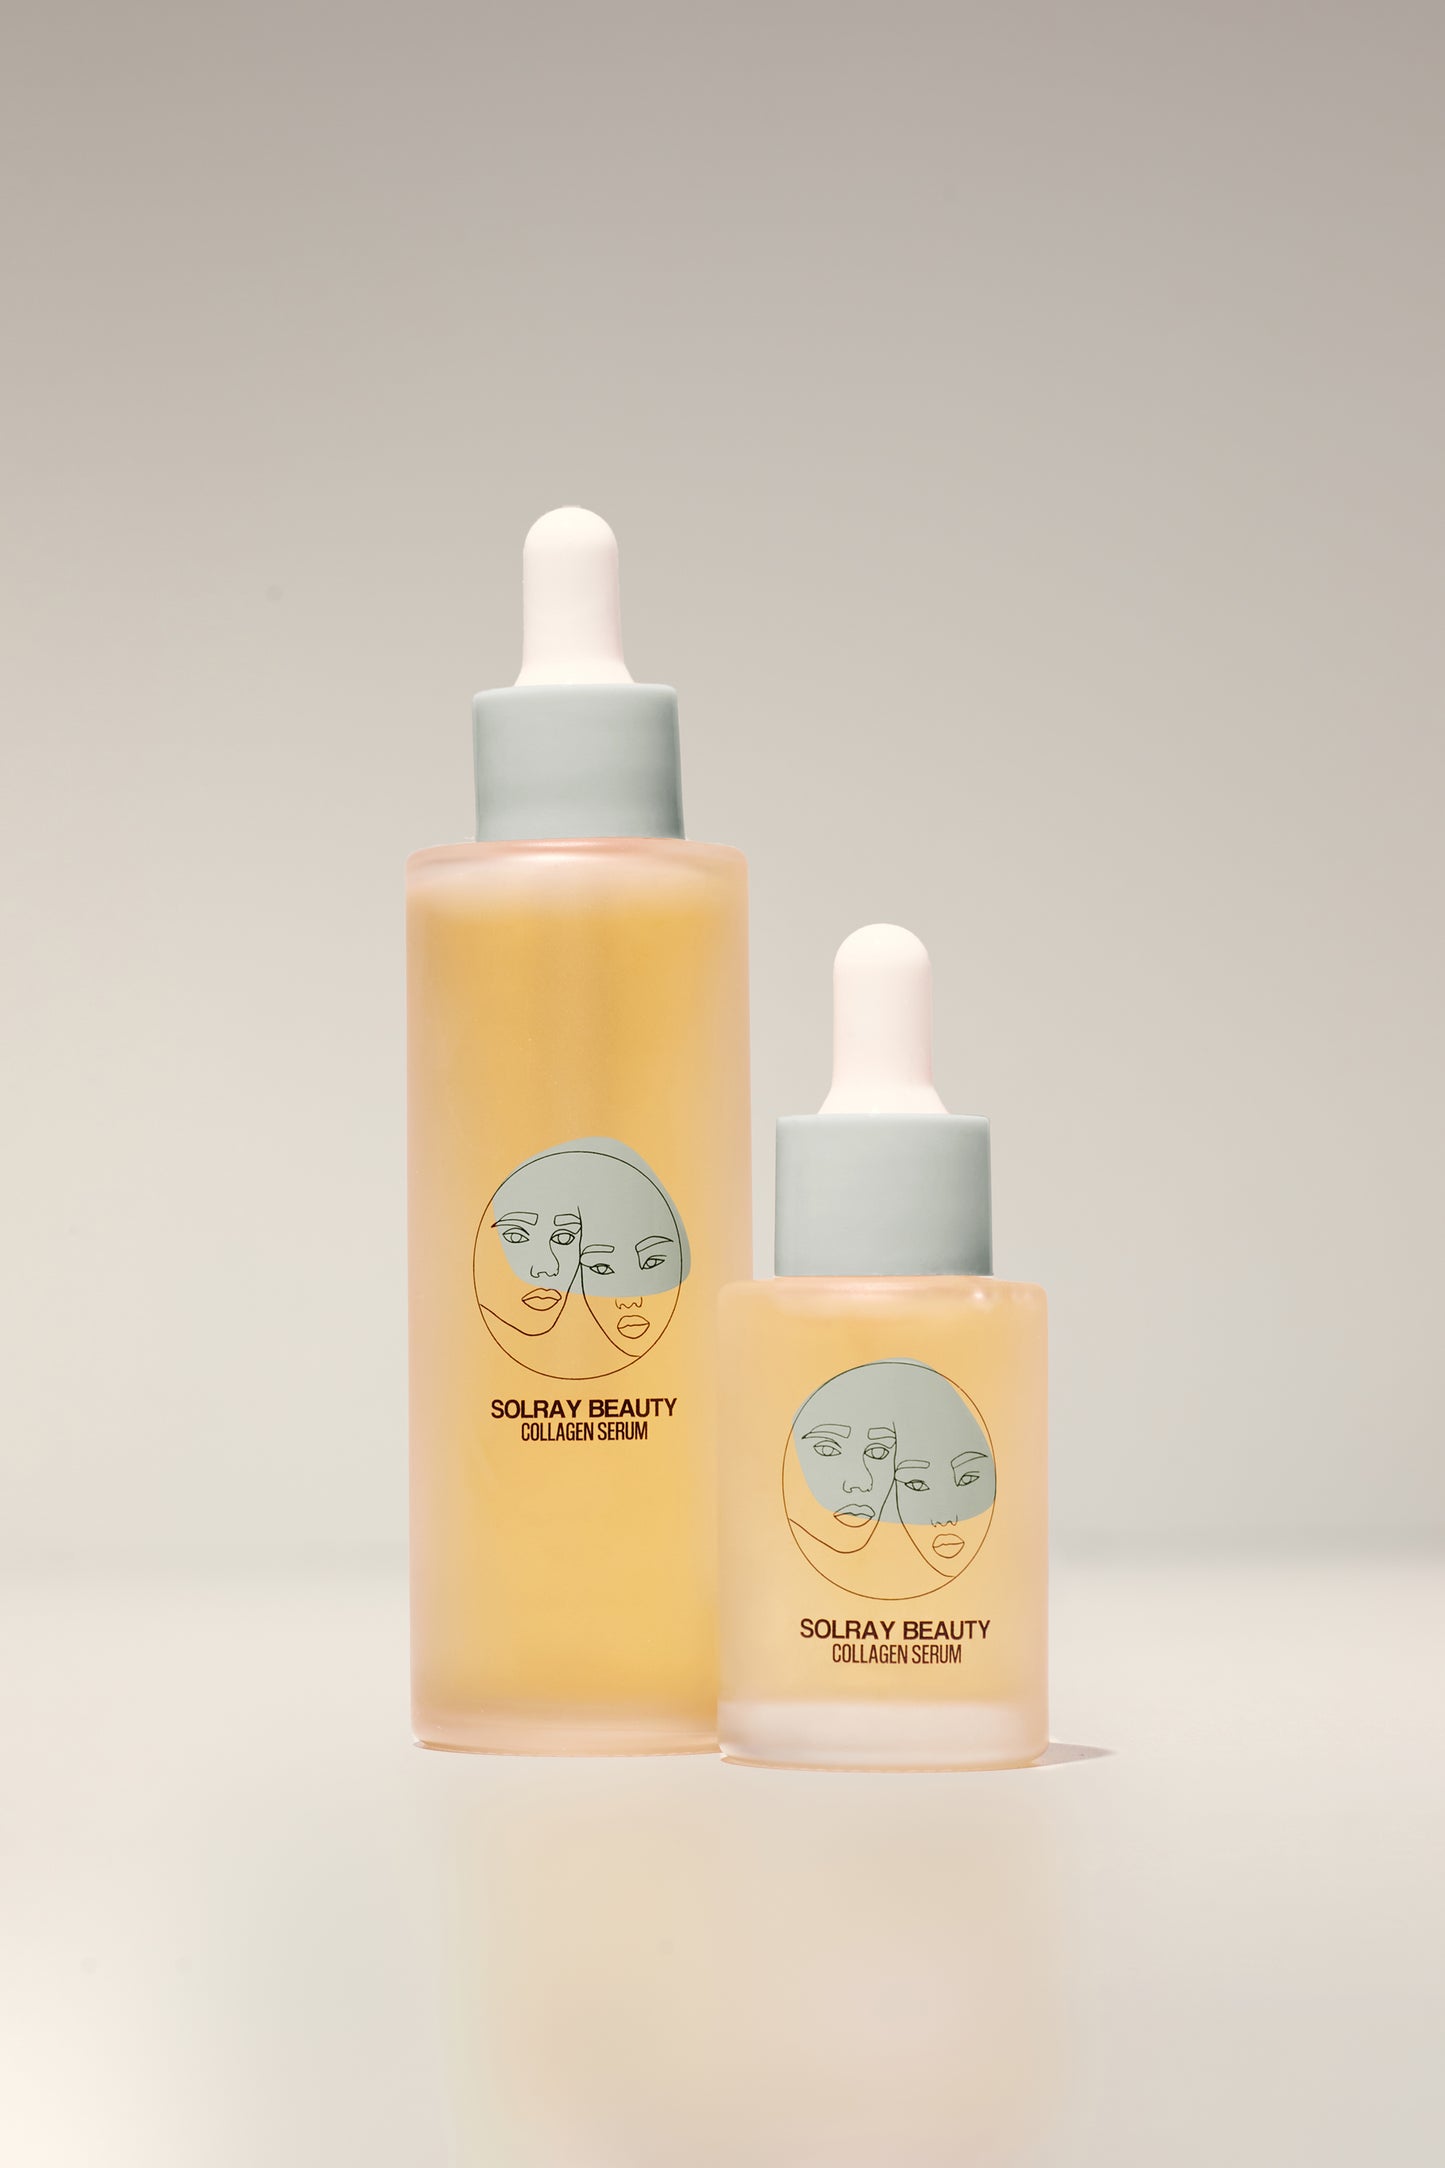 The Collagen Serum from SolRay Beauty in 30ml and 80ml bottles side by side, showing the size options available.